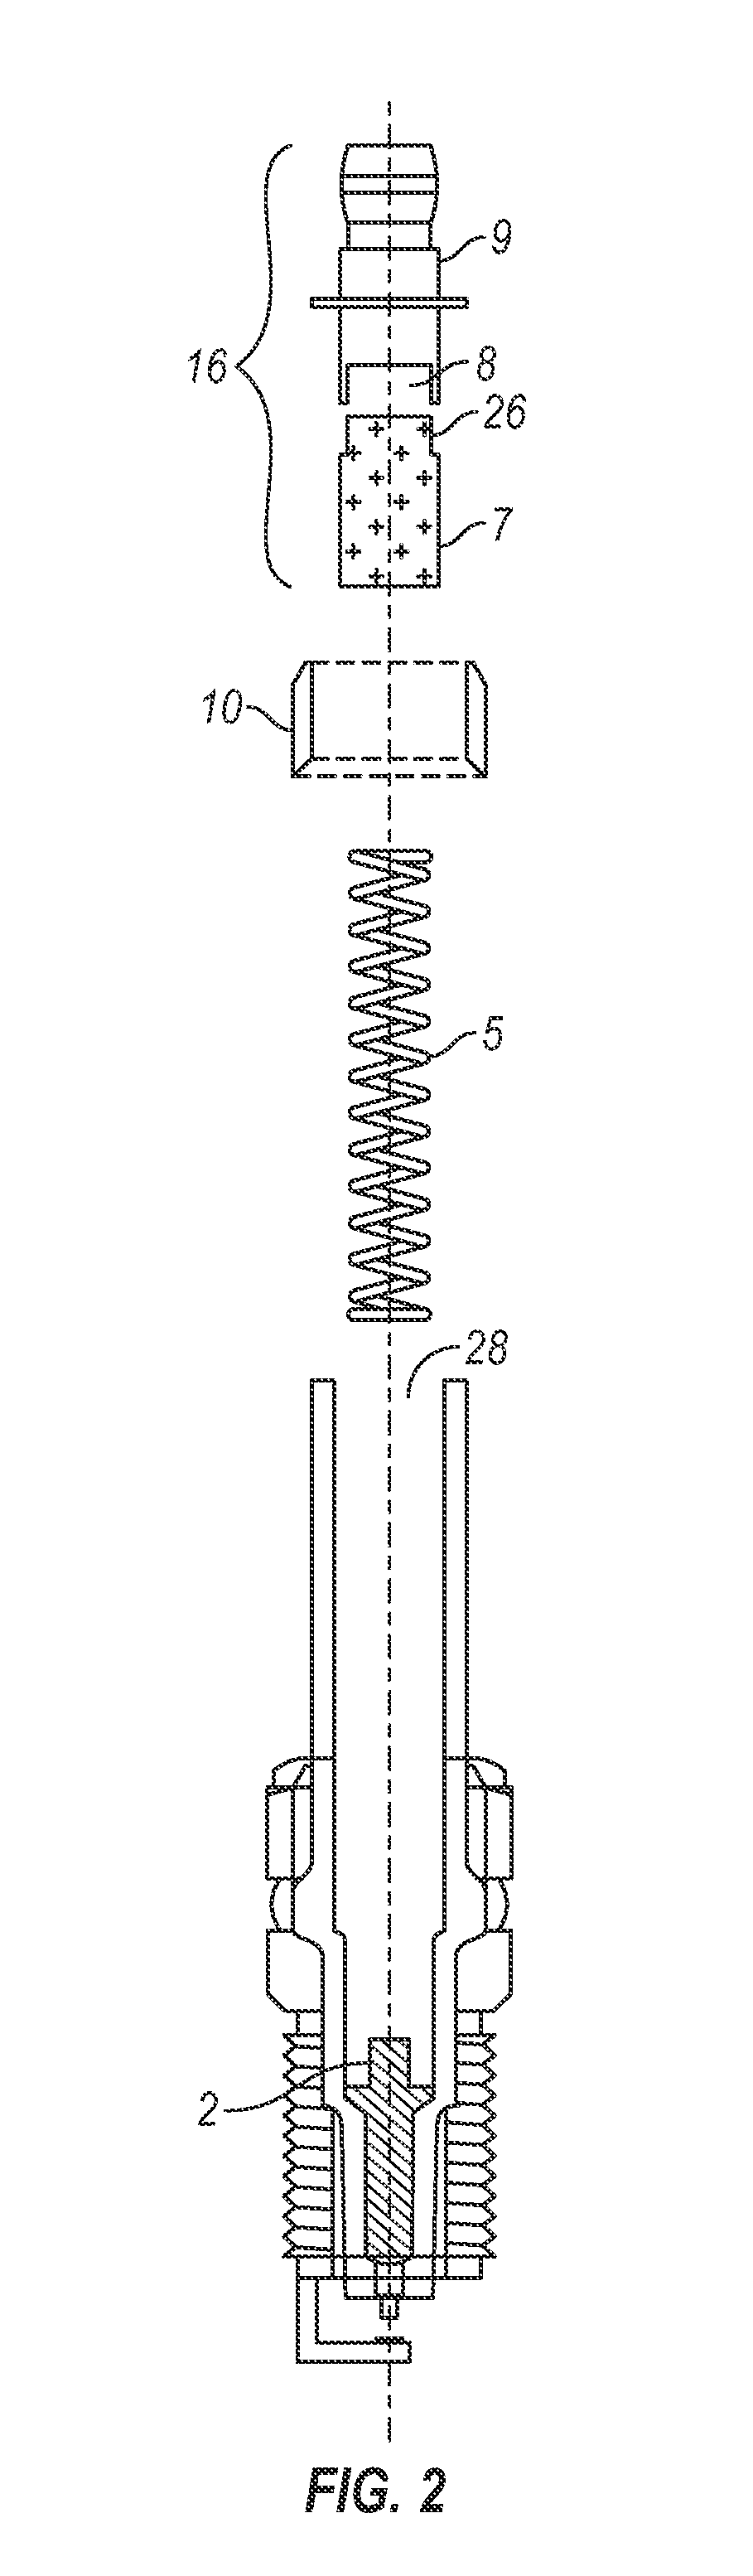 High power discharge fuel ignitor